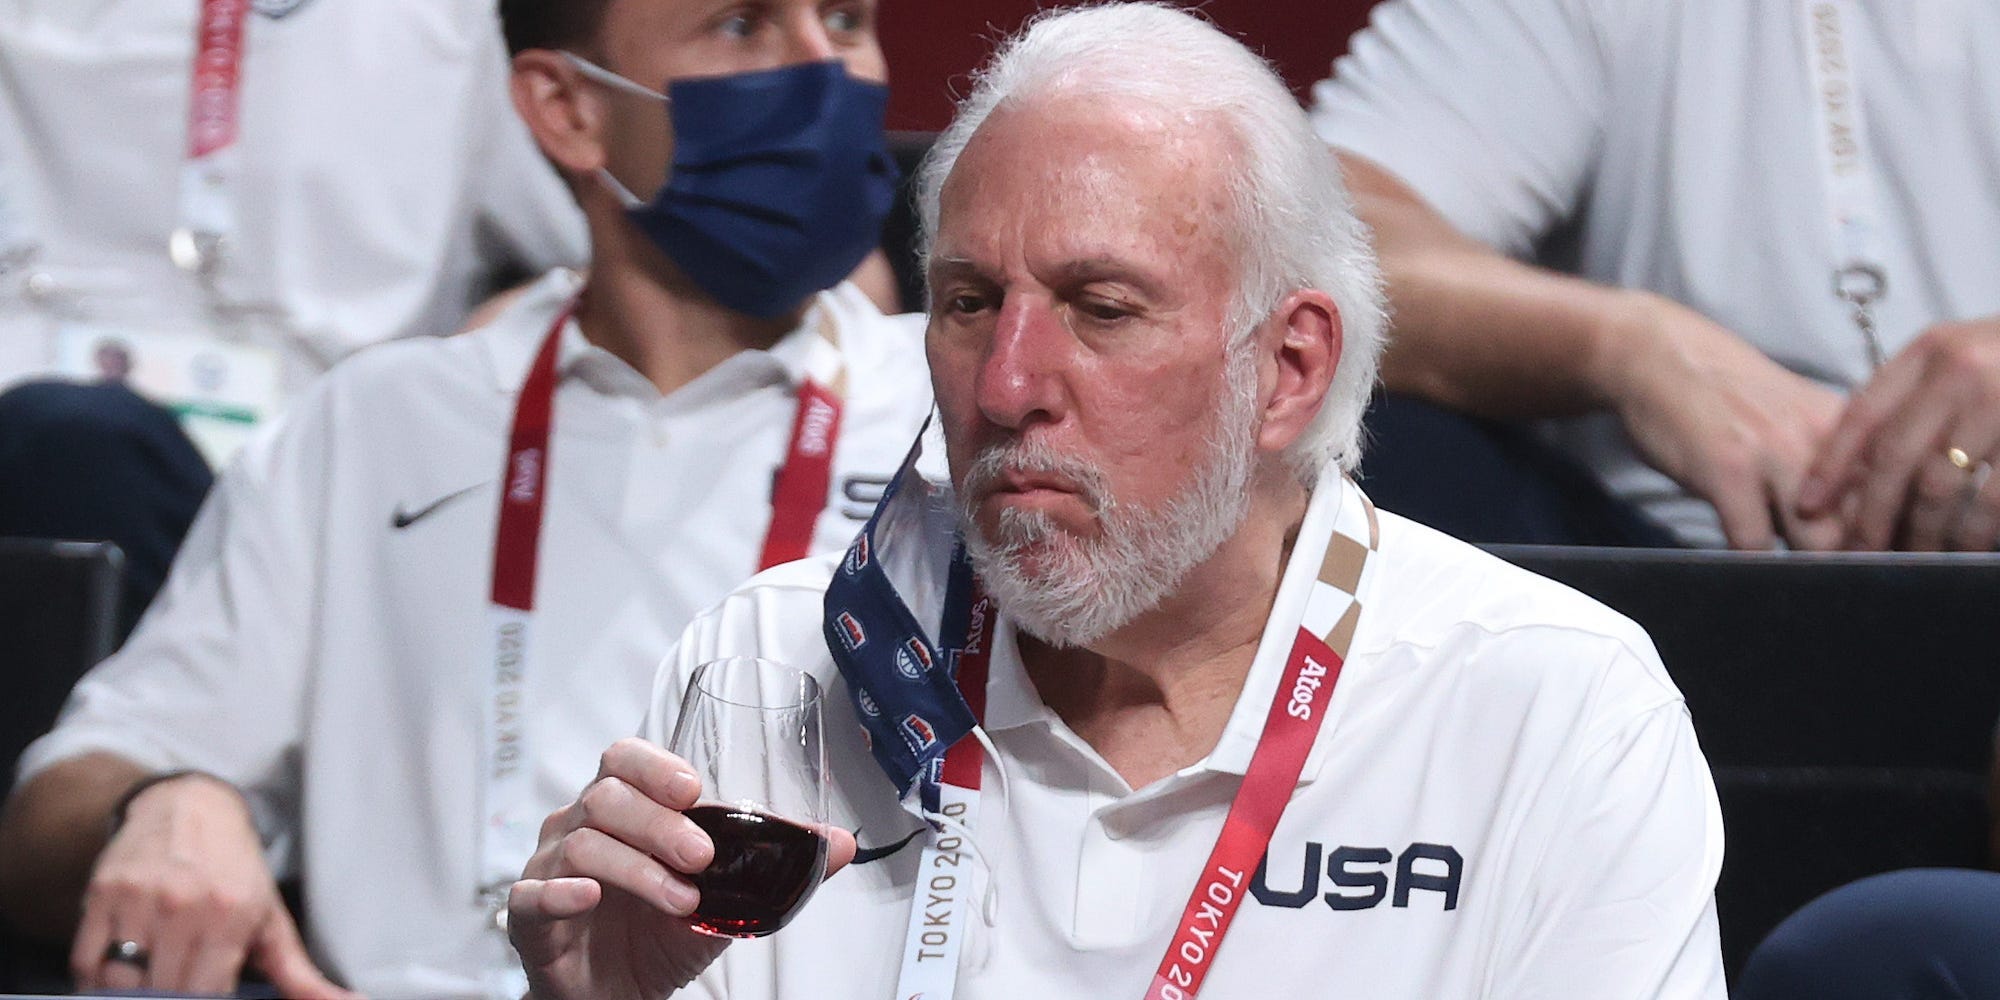 Gregg Popovich holds a wine glass at the Tokyo Olympics.